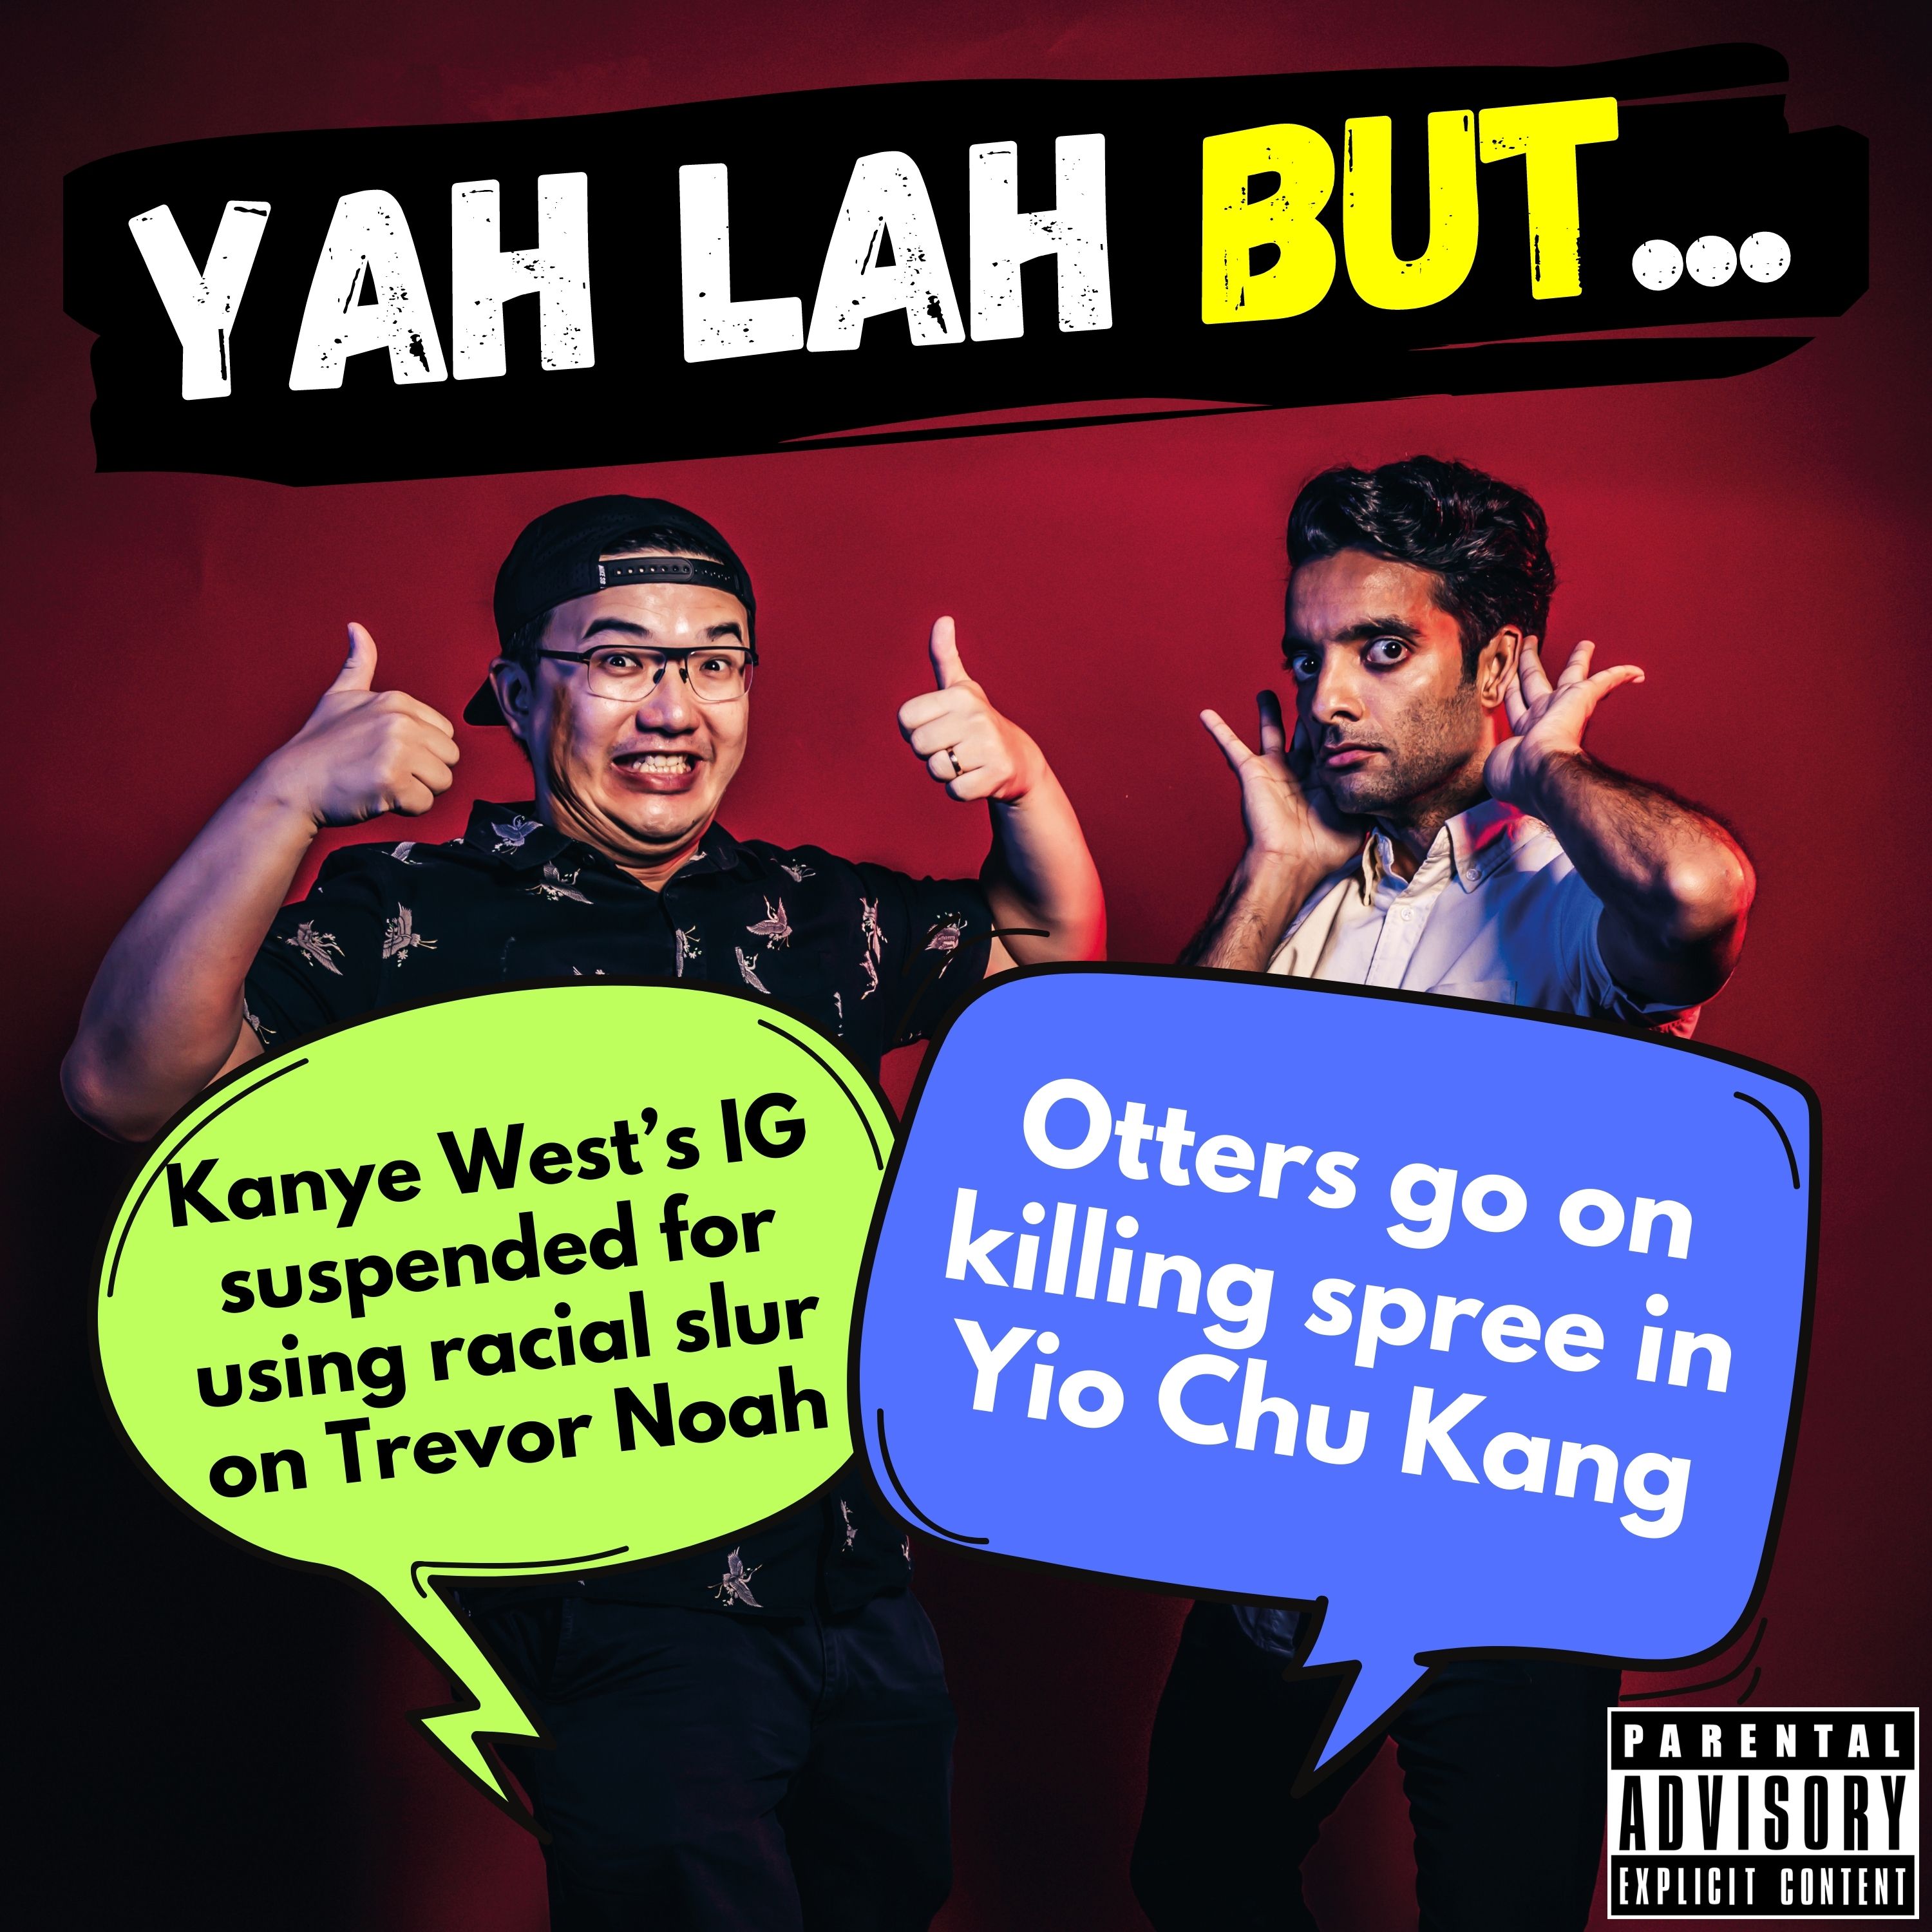 #275 - Kanye West’s IG suspended for using racial slur on Trevor Noah & otters go on killing spree in Yio Chu Kang